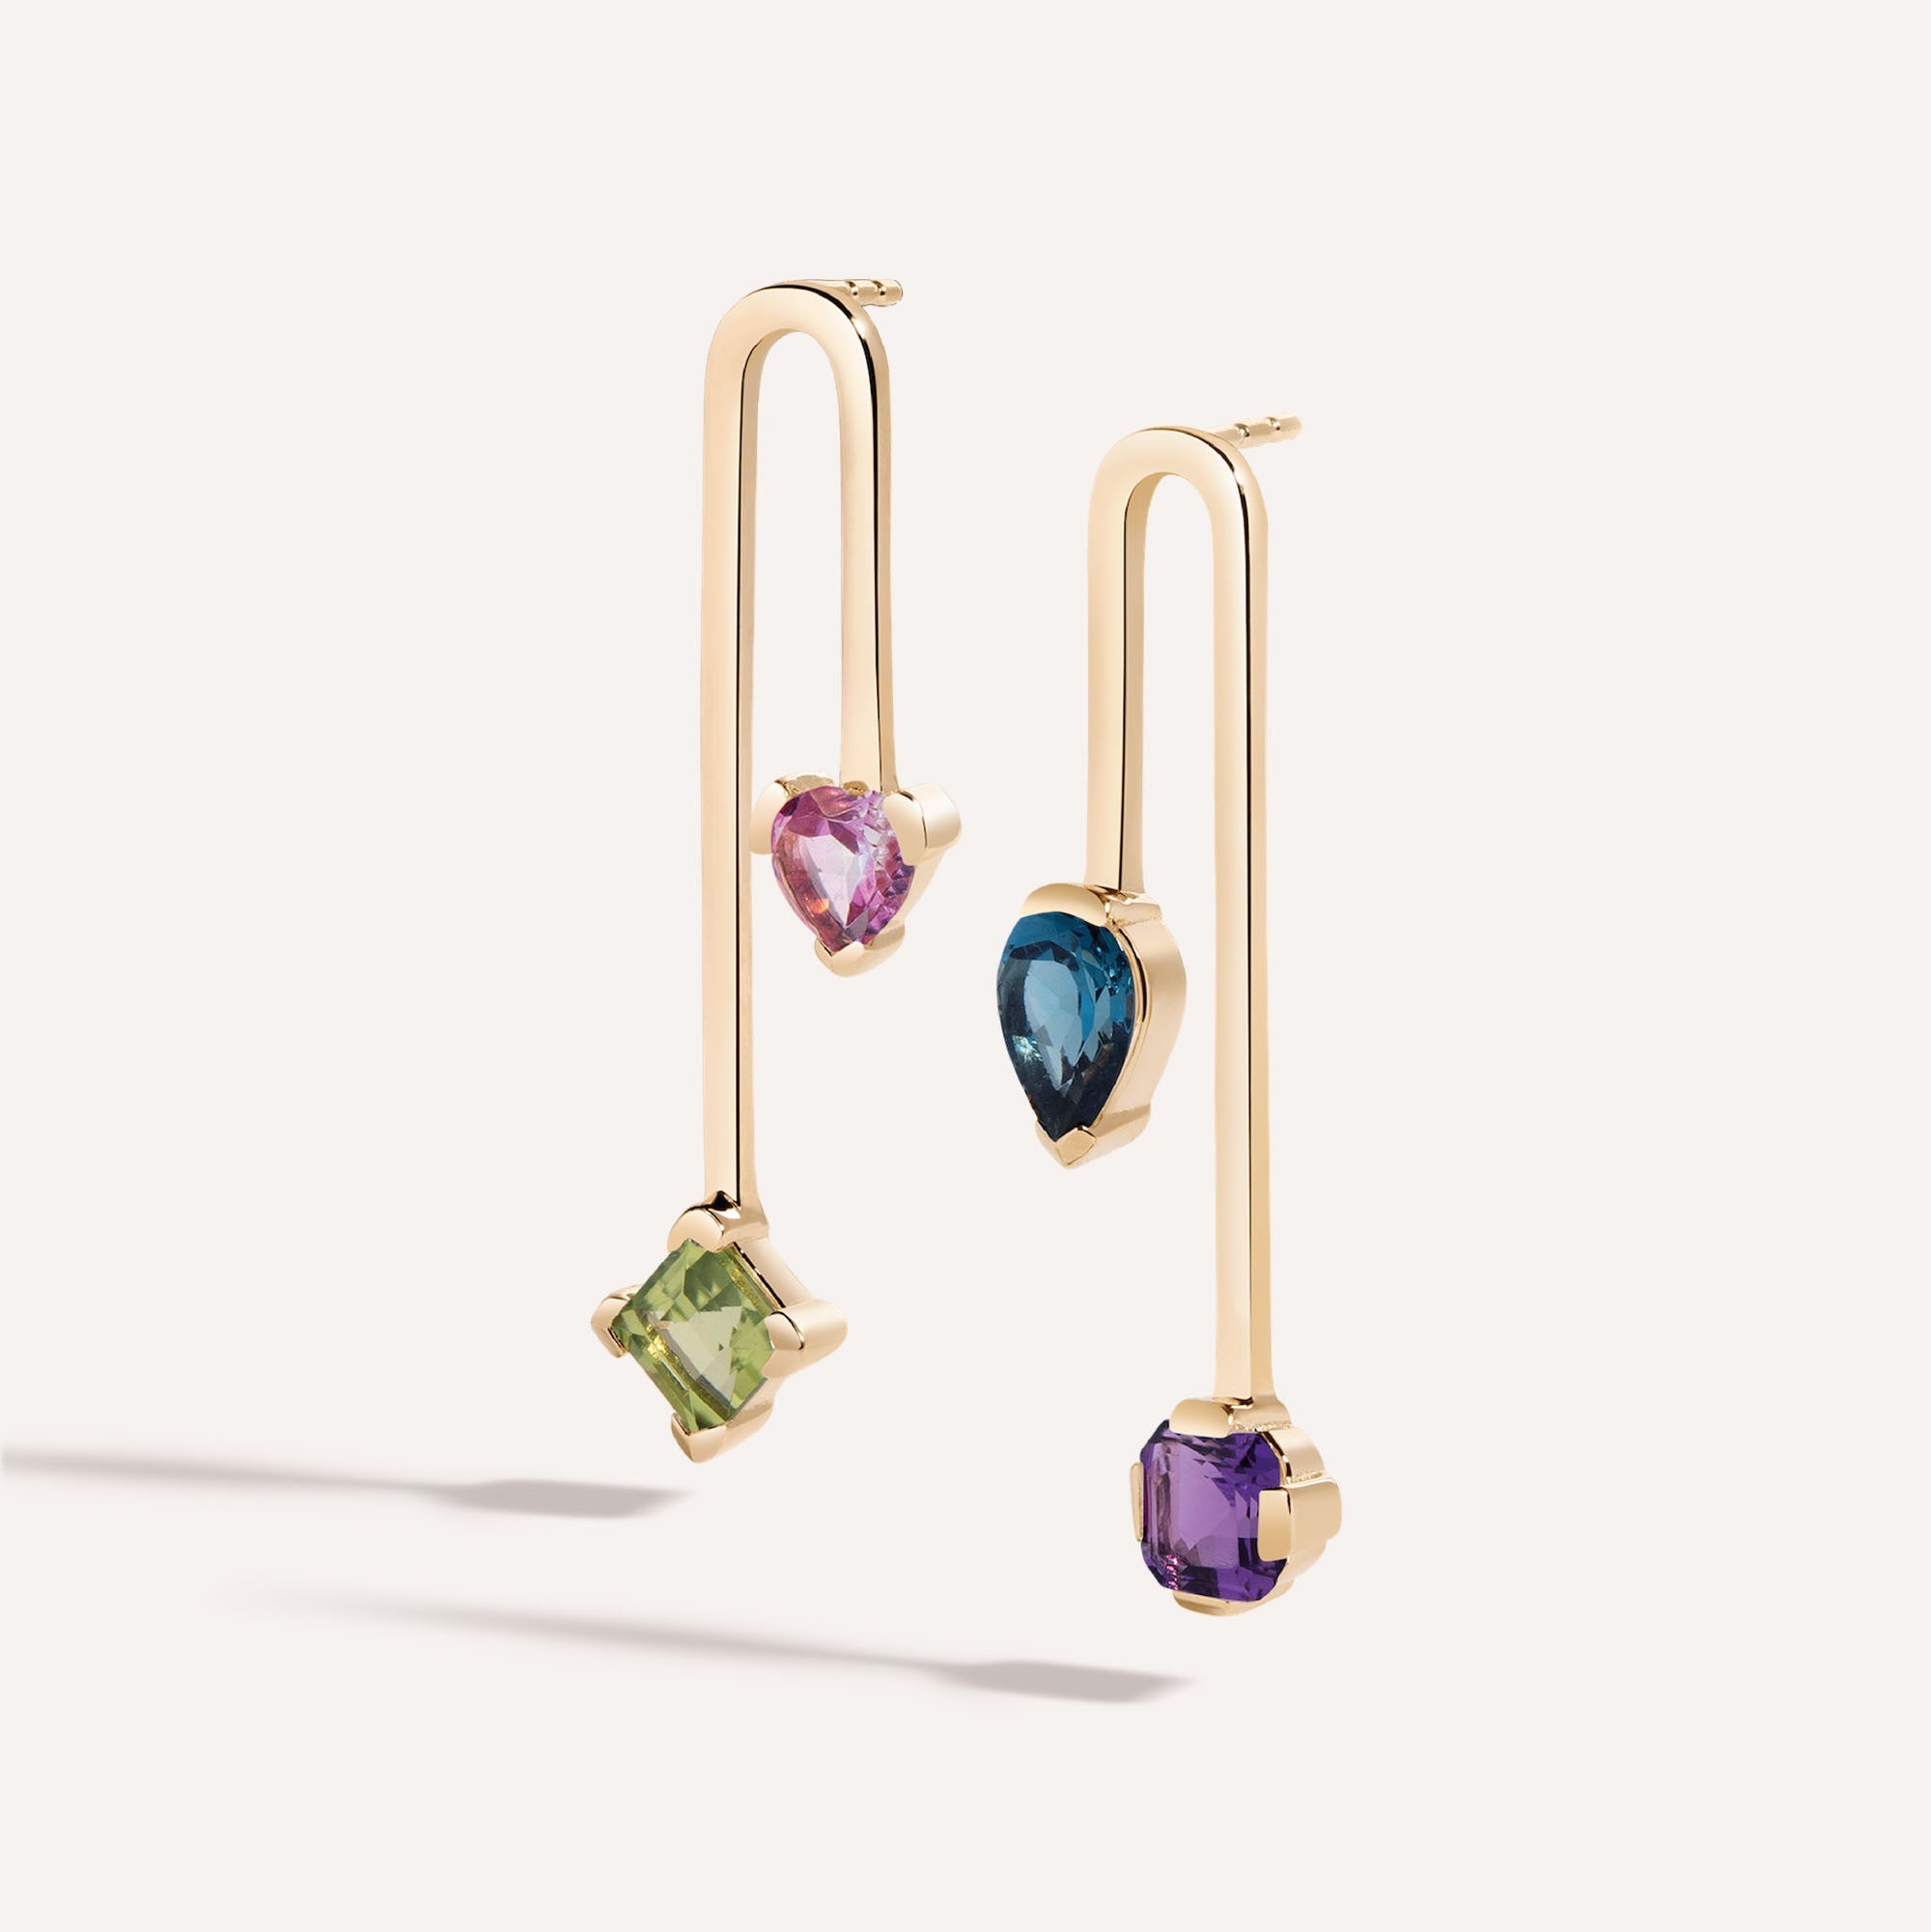 LÚDERE gold drop stud earrings with peridot square, pink topaz heart,  amethyst asscher, and London blue topaz pear gemstones